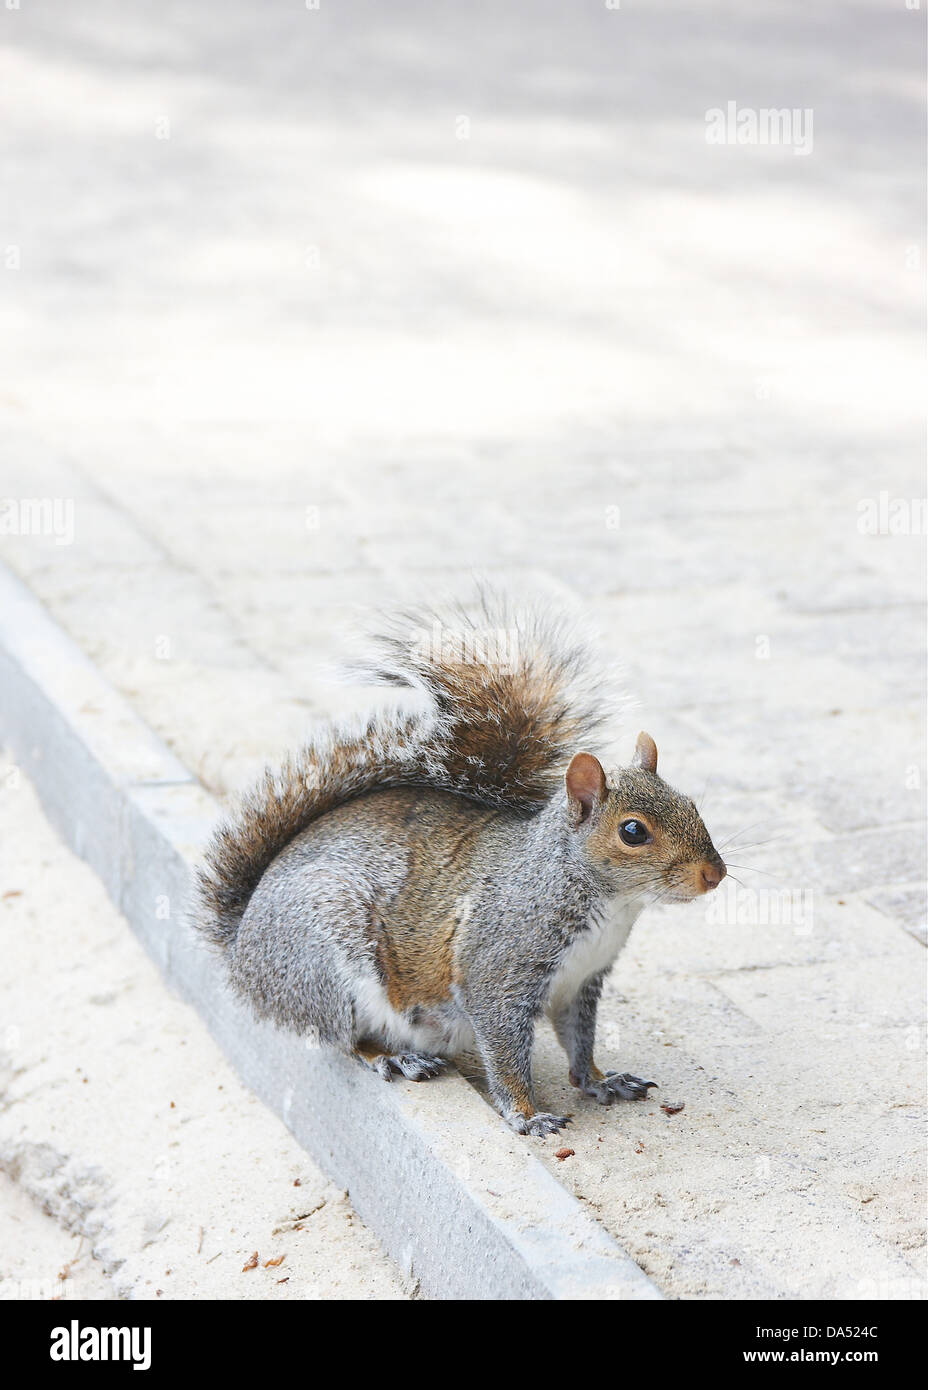 Portrait of a grey squirrel, sat on pavement, taken at Center parcs, Longleat, UK. Stock Photo